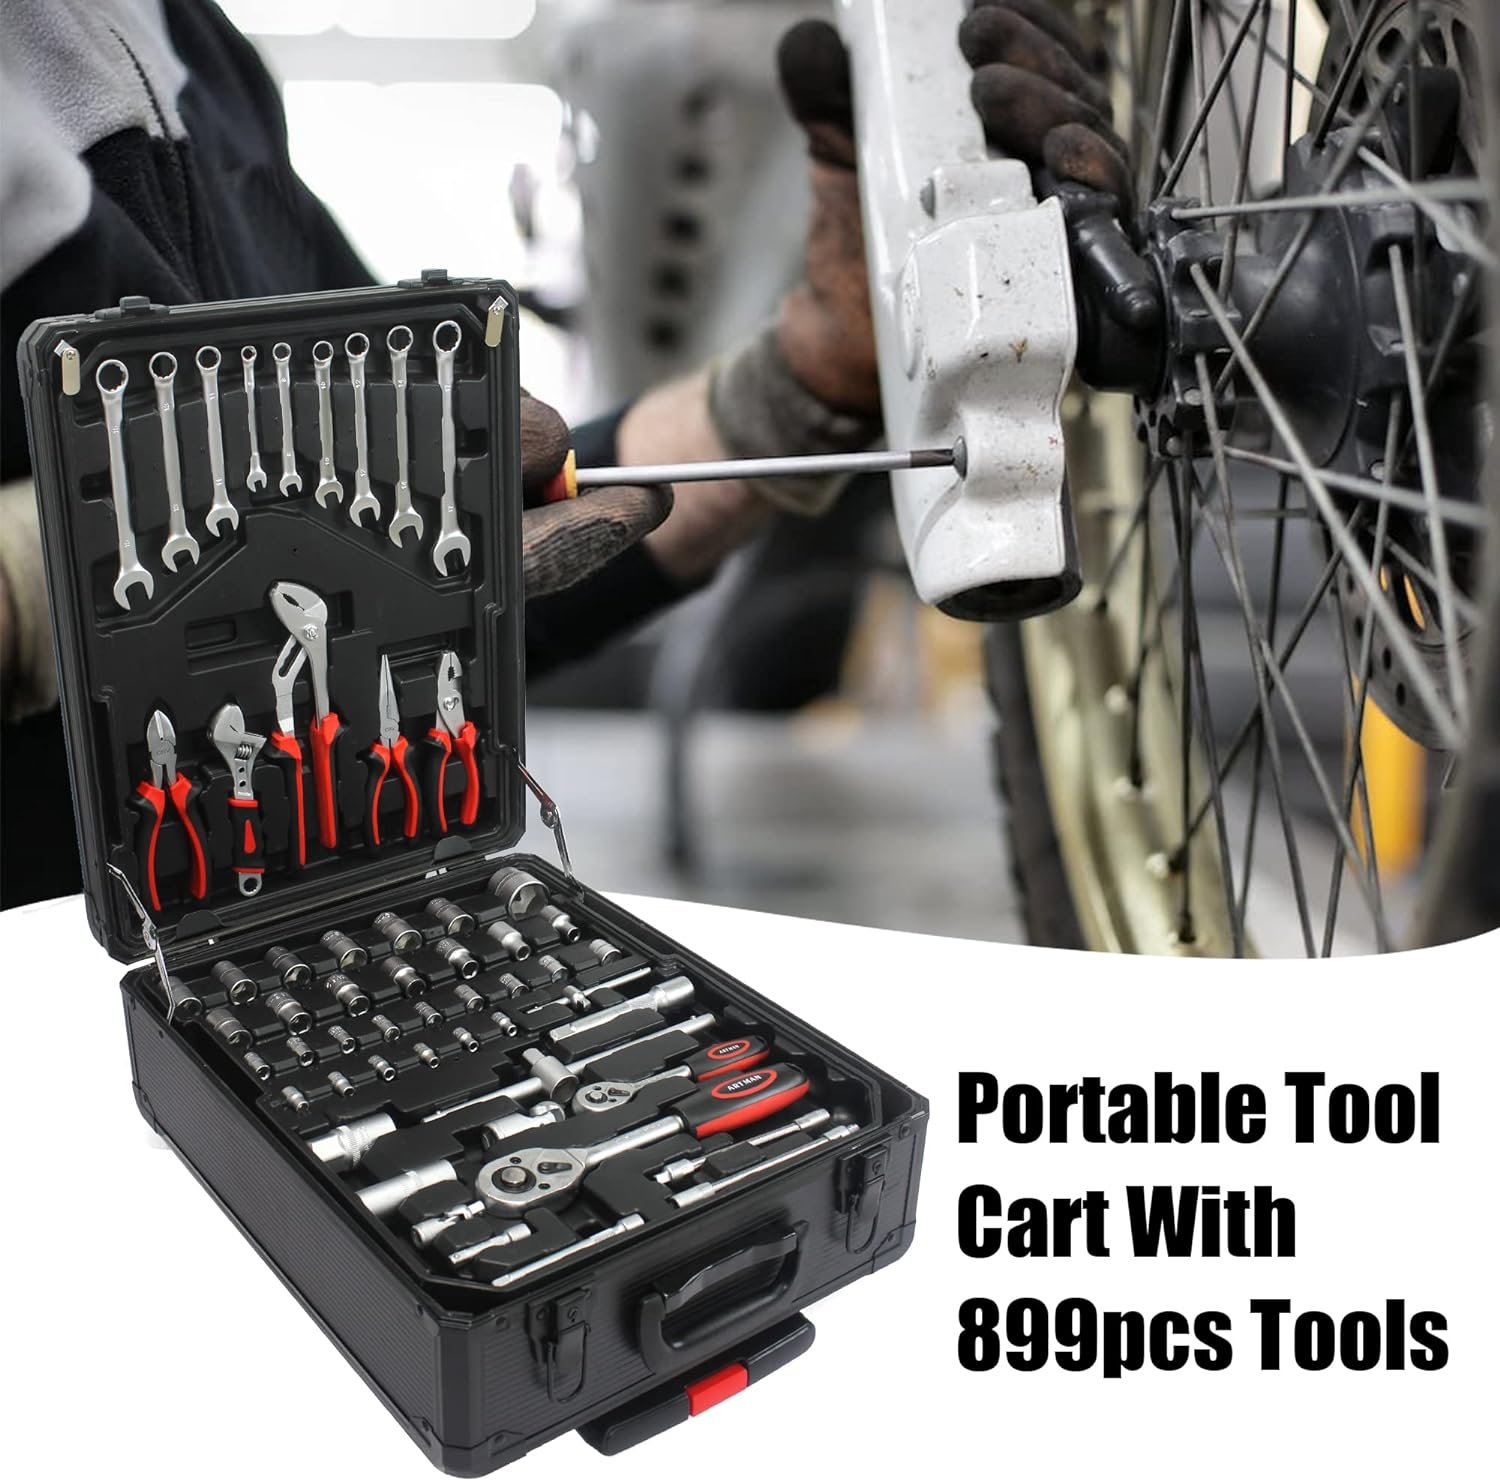 899pcs Tool Box with Tools Review